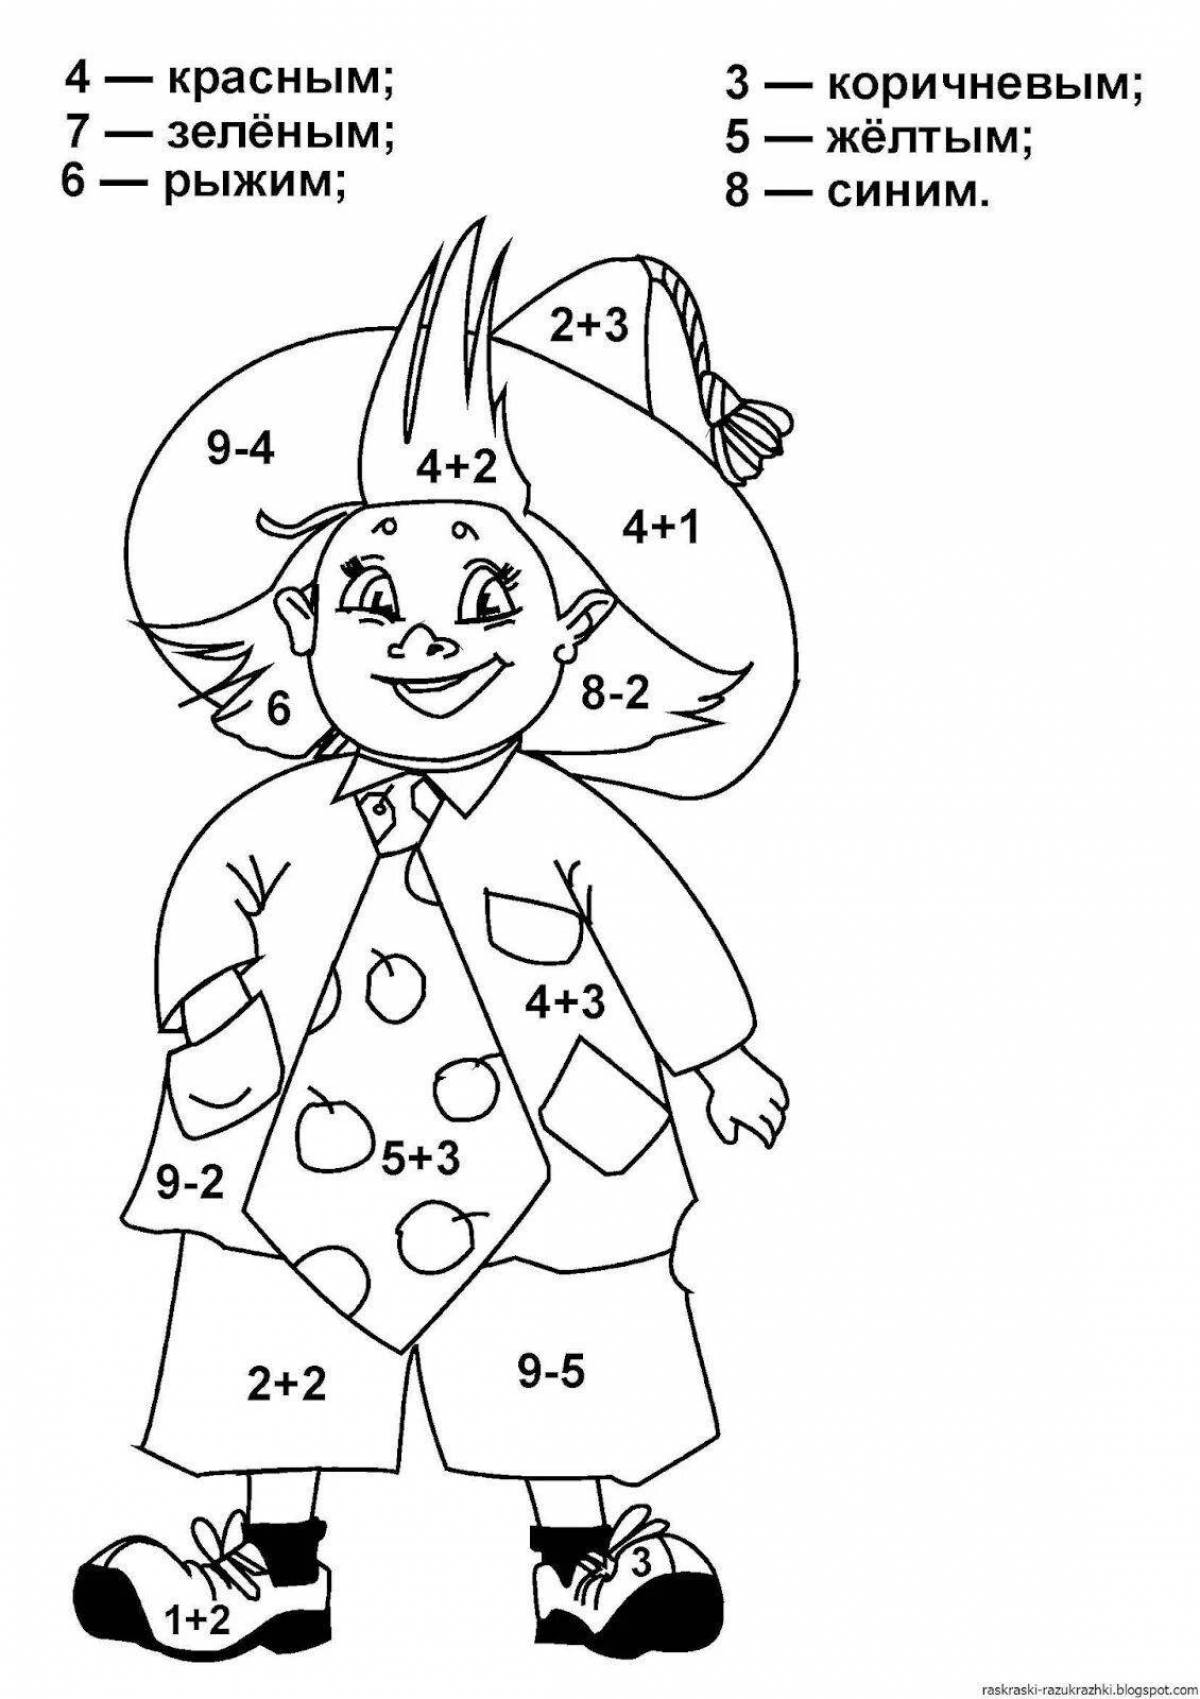 Coloring pages examples of creative mathematics